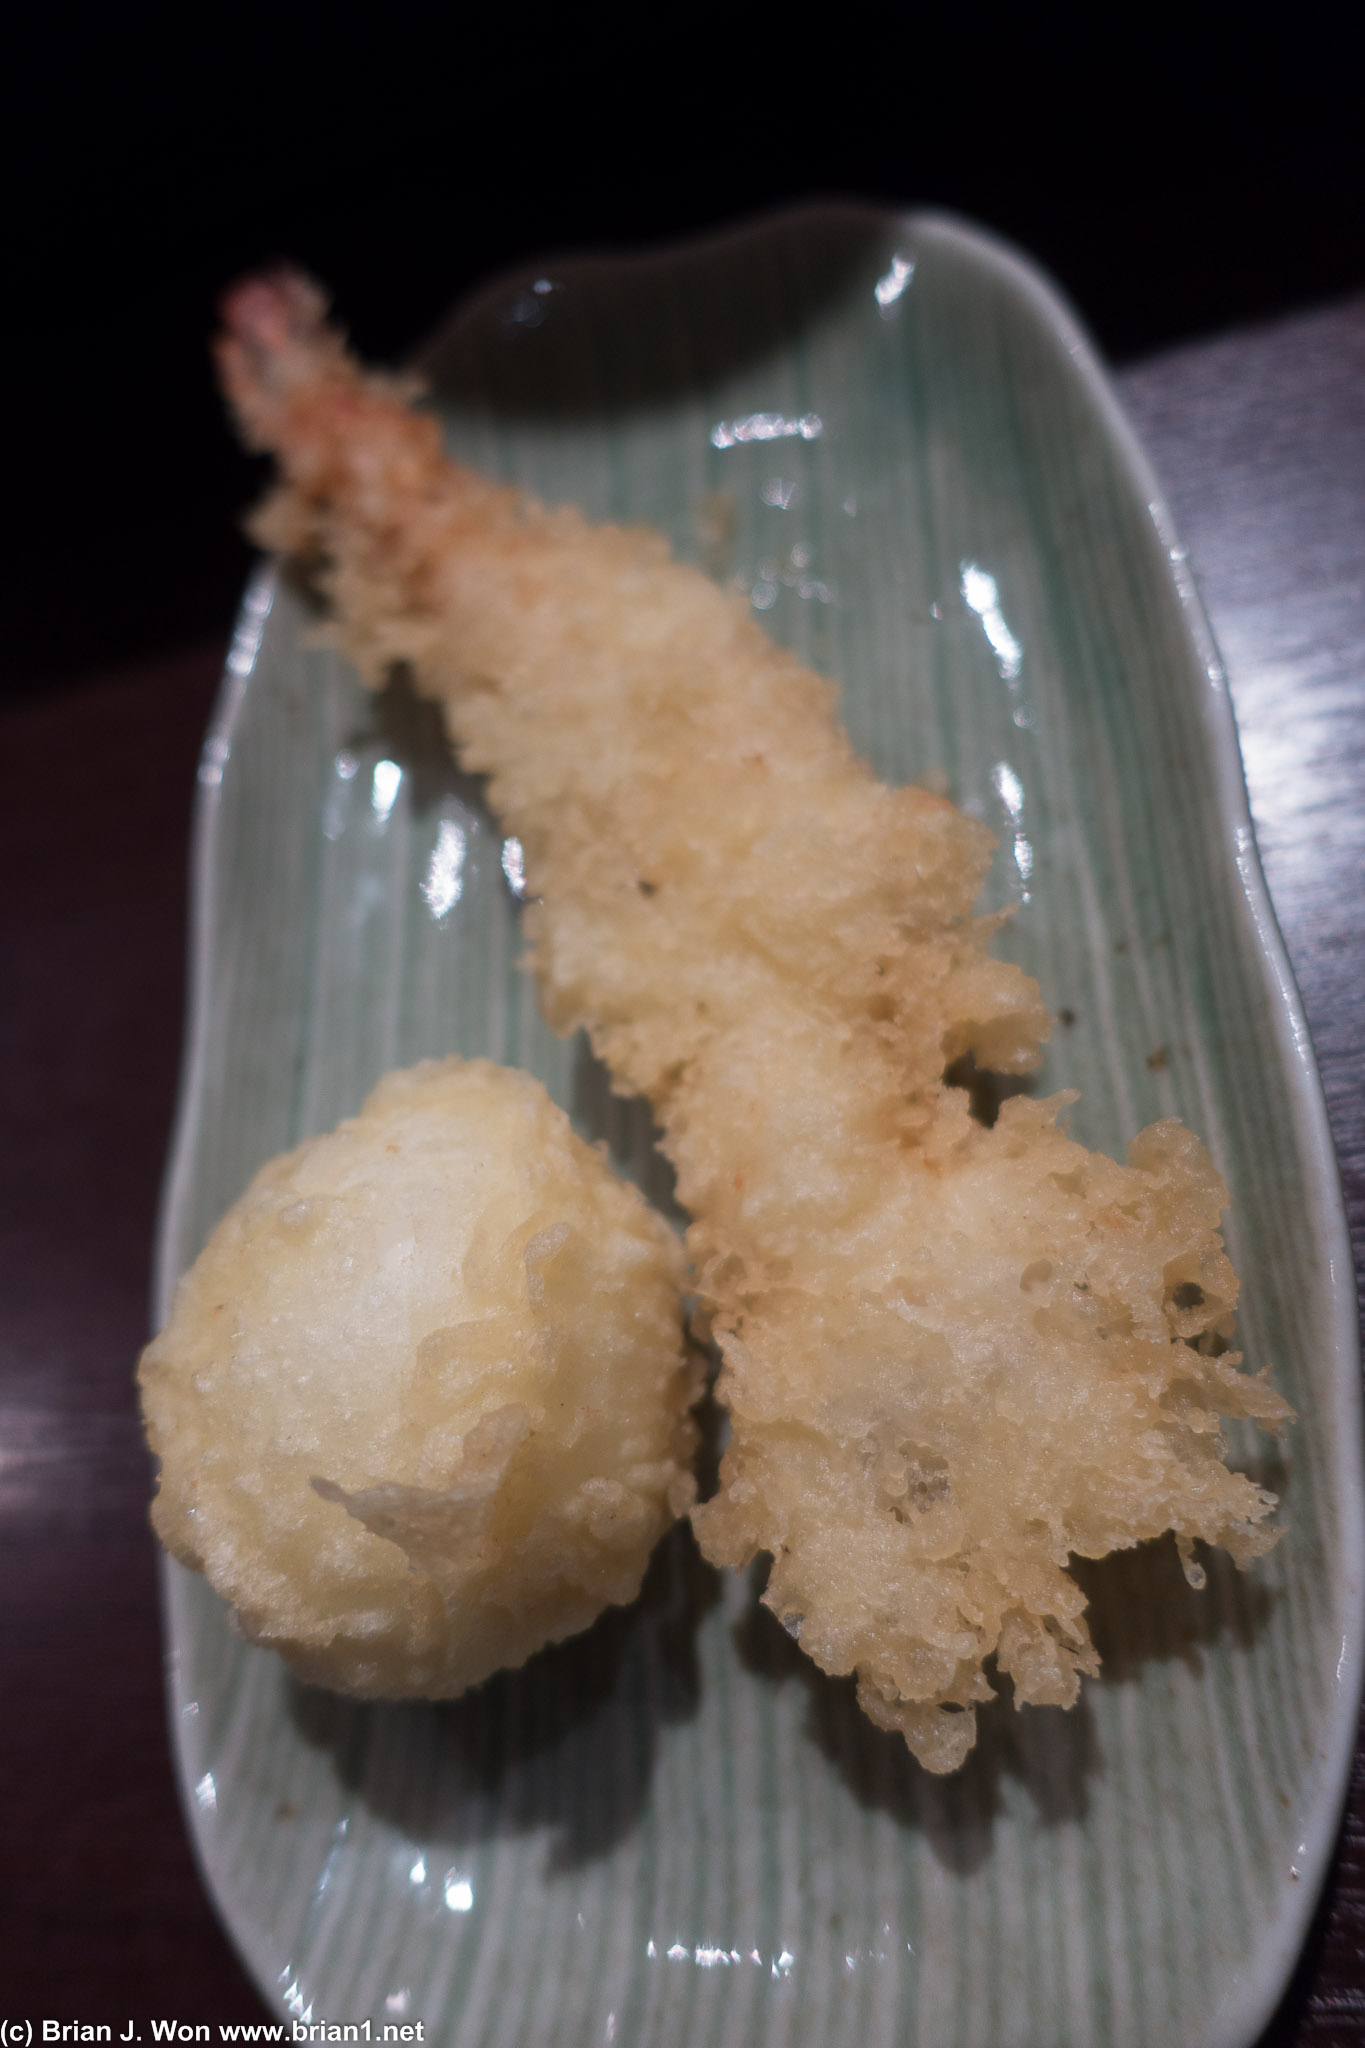 Tempura is just about perfect.